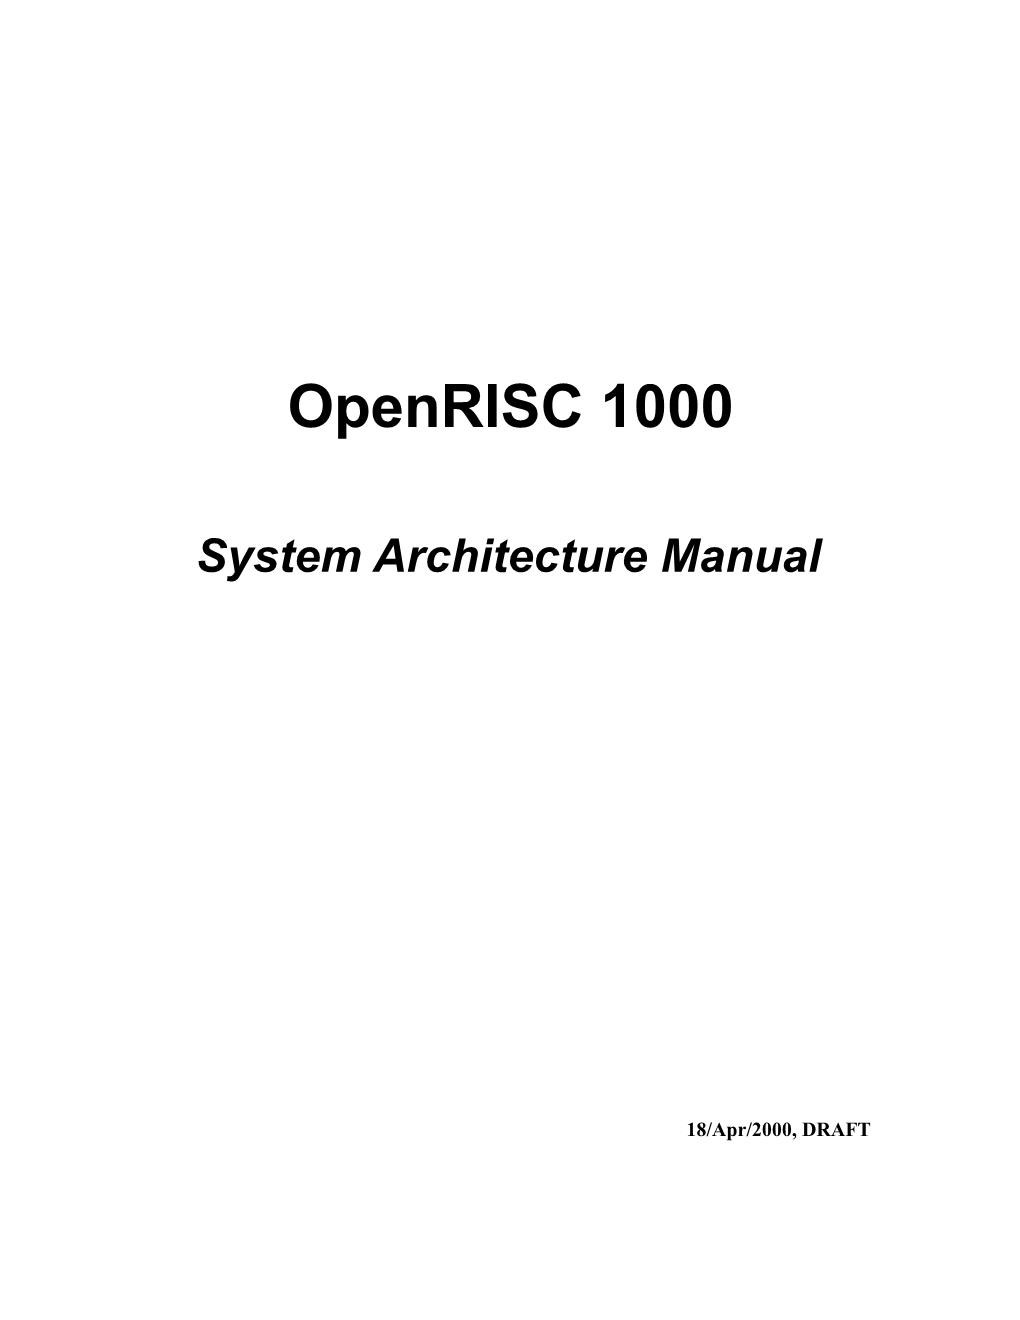 System Architecture Manual